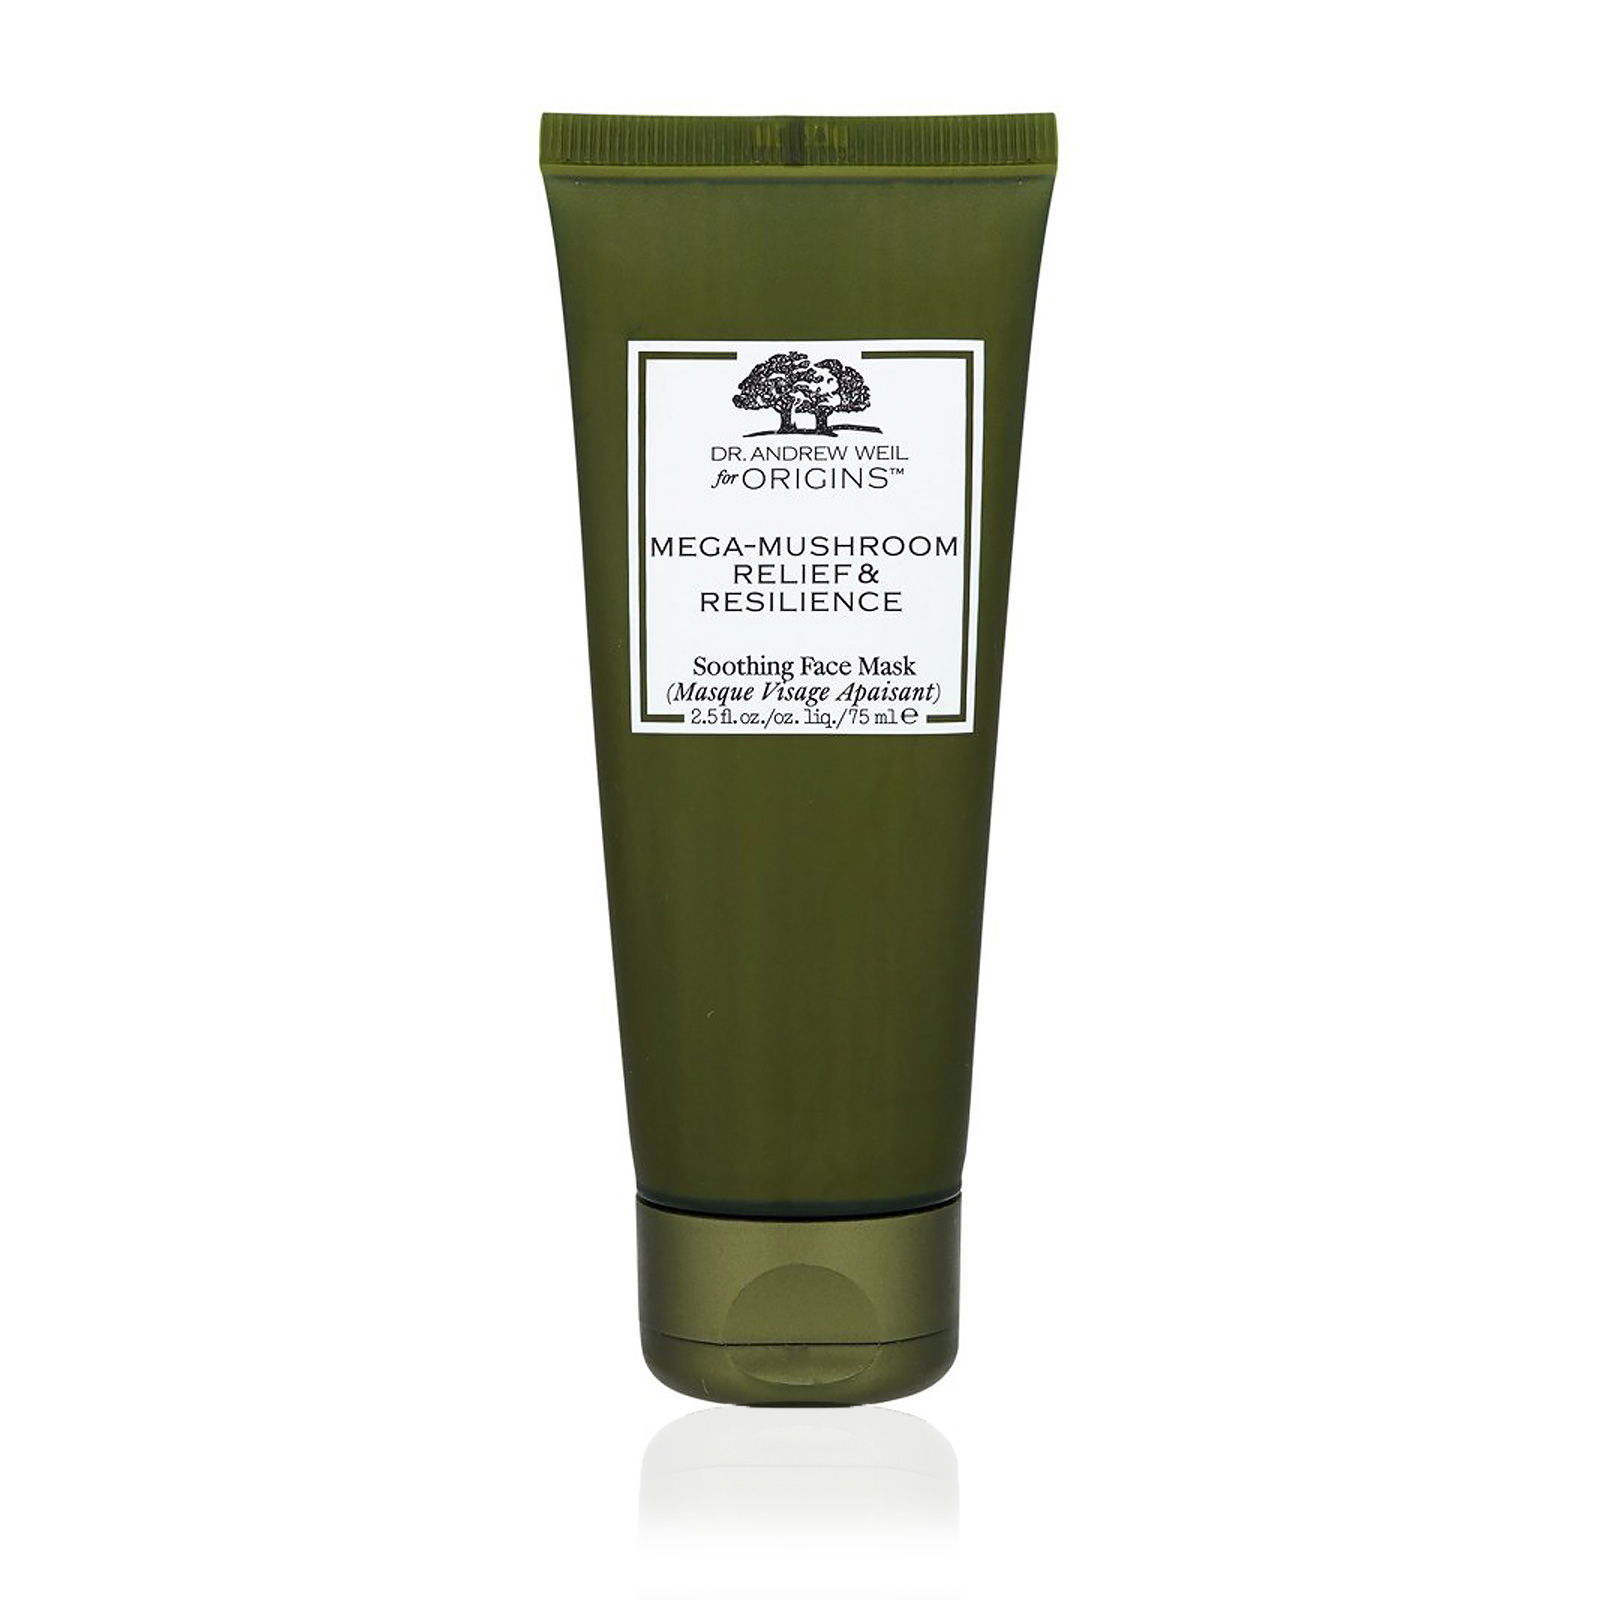 Dr. Andrew Weil Mega-Mushroom Relief & Resilience Soothing Face Mask